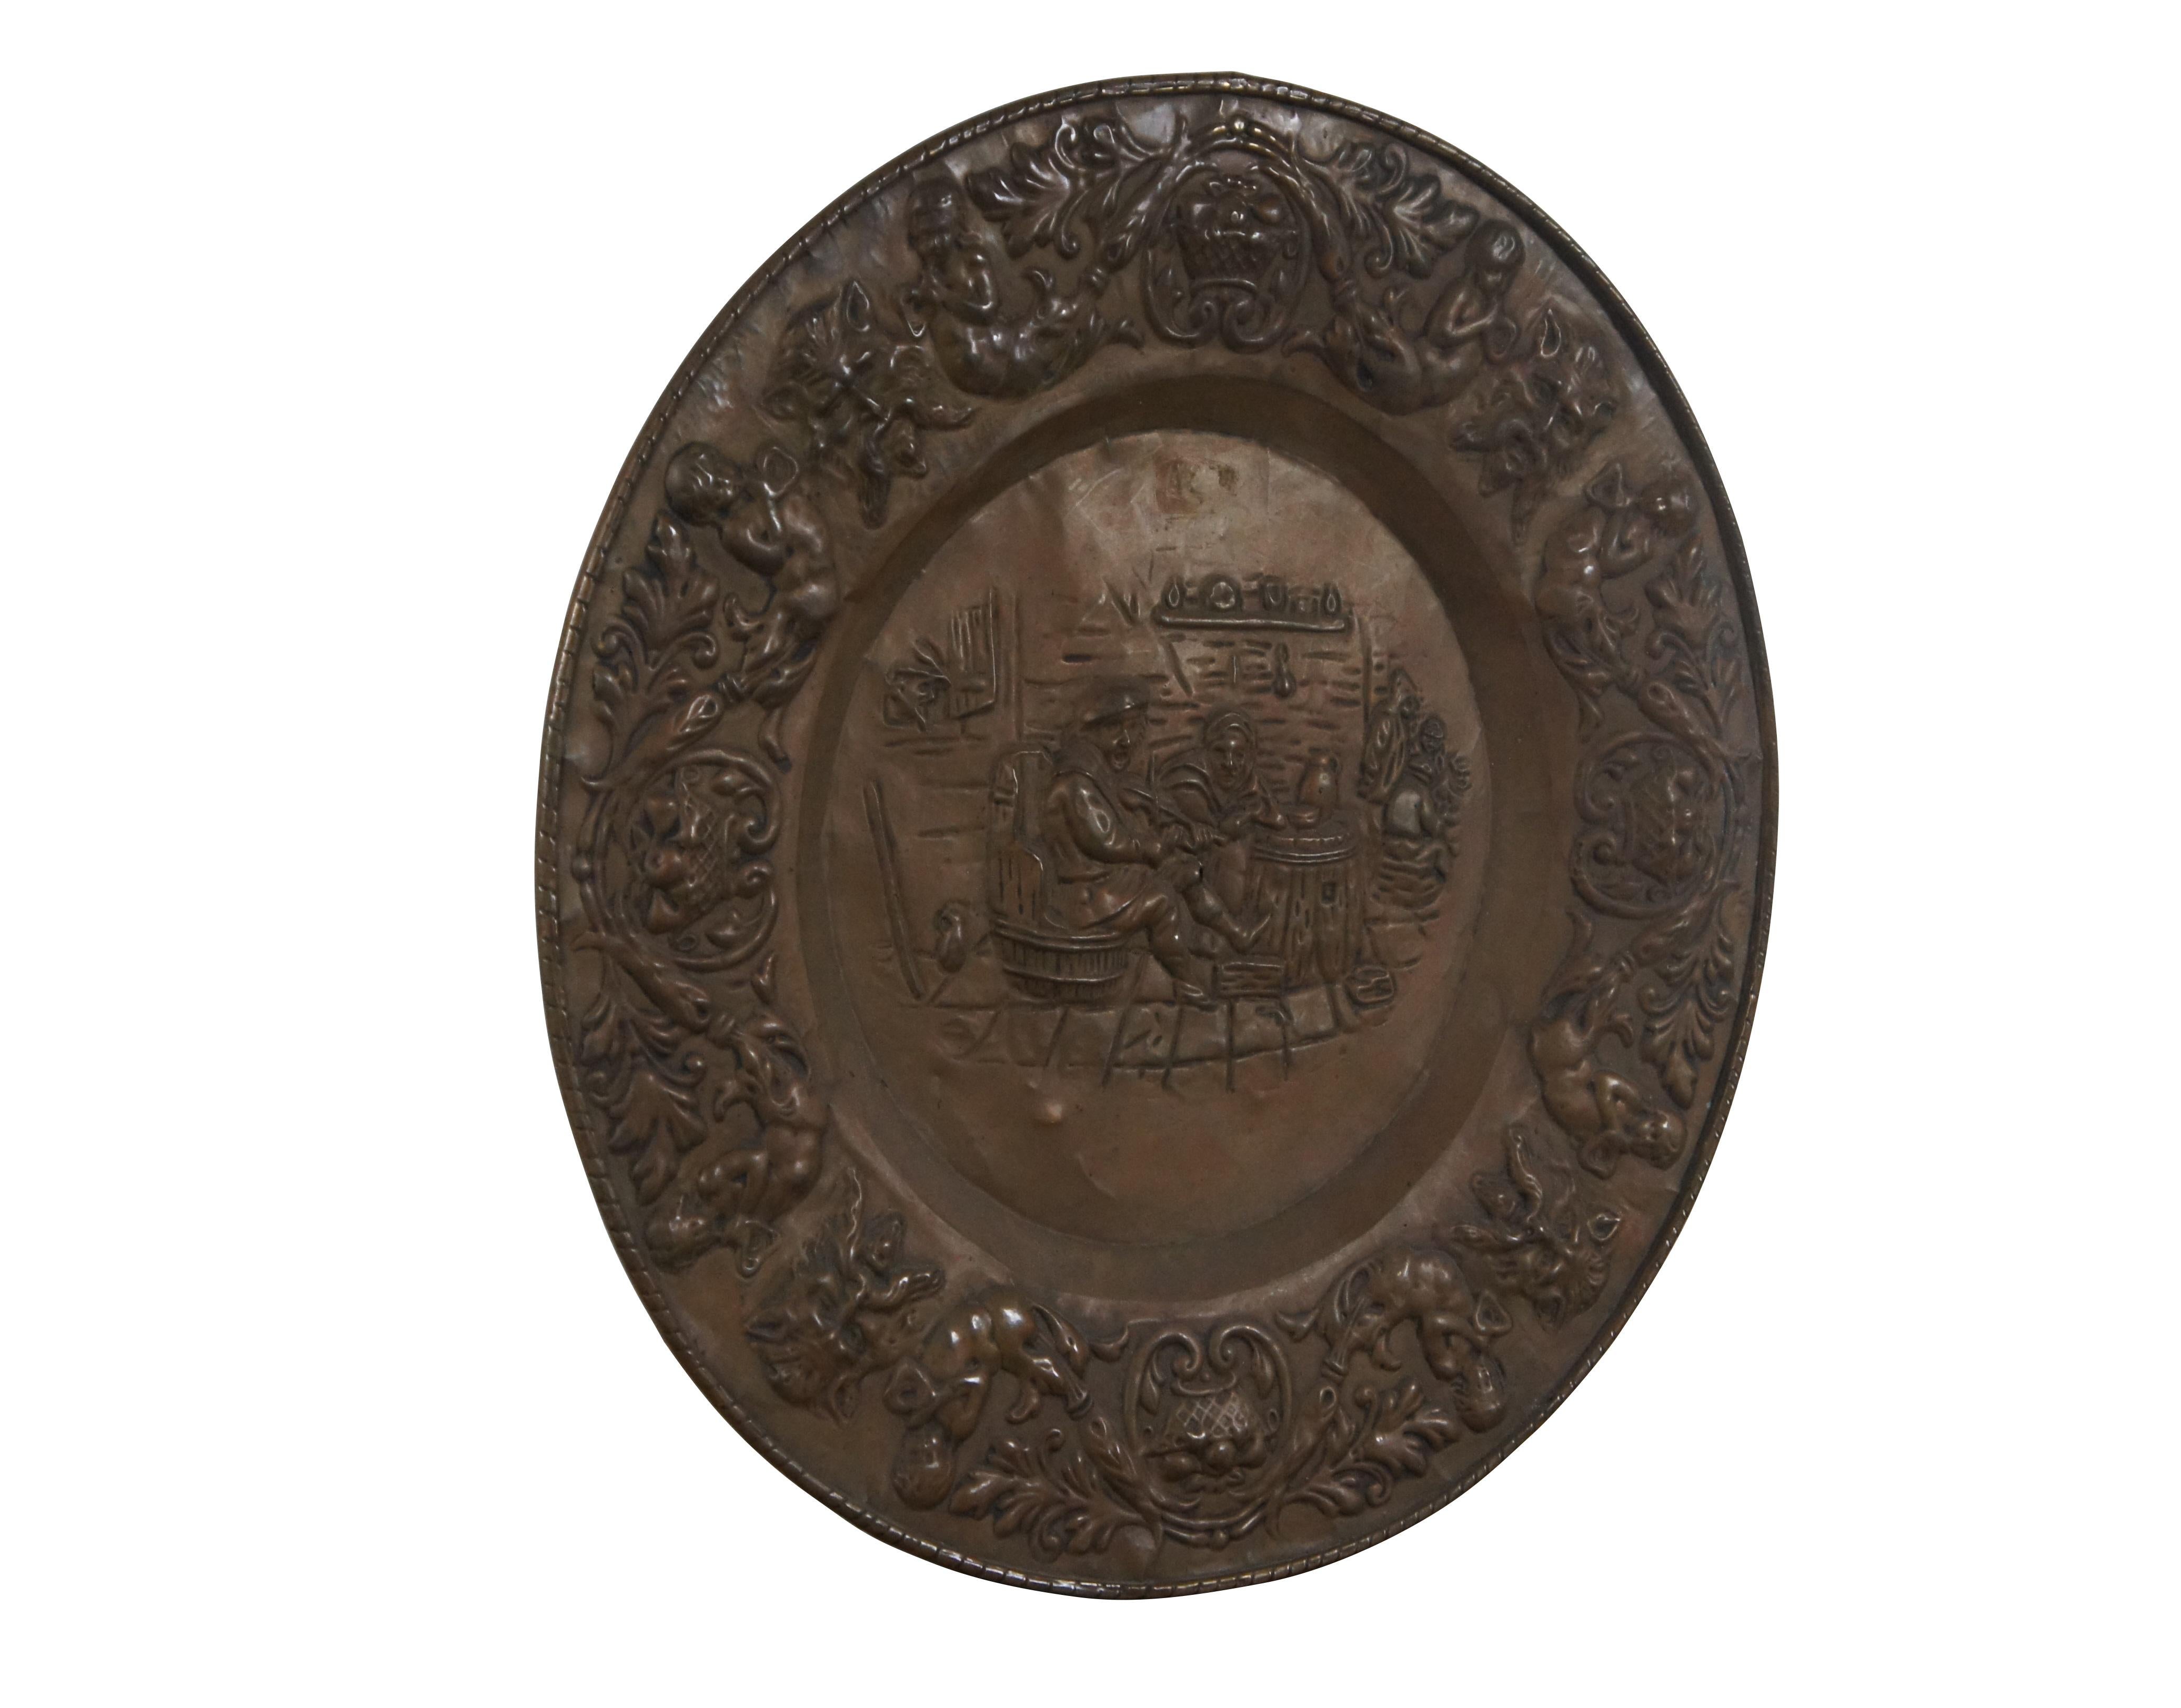 Antique embossed copper repousse wall hanging charger / platter featuring a tavern scene at the center and Neoclassical motif of cherubs / putties, baskets of fruit and Green Man faces around the edge.

Dimensions:
24.25